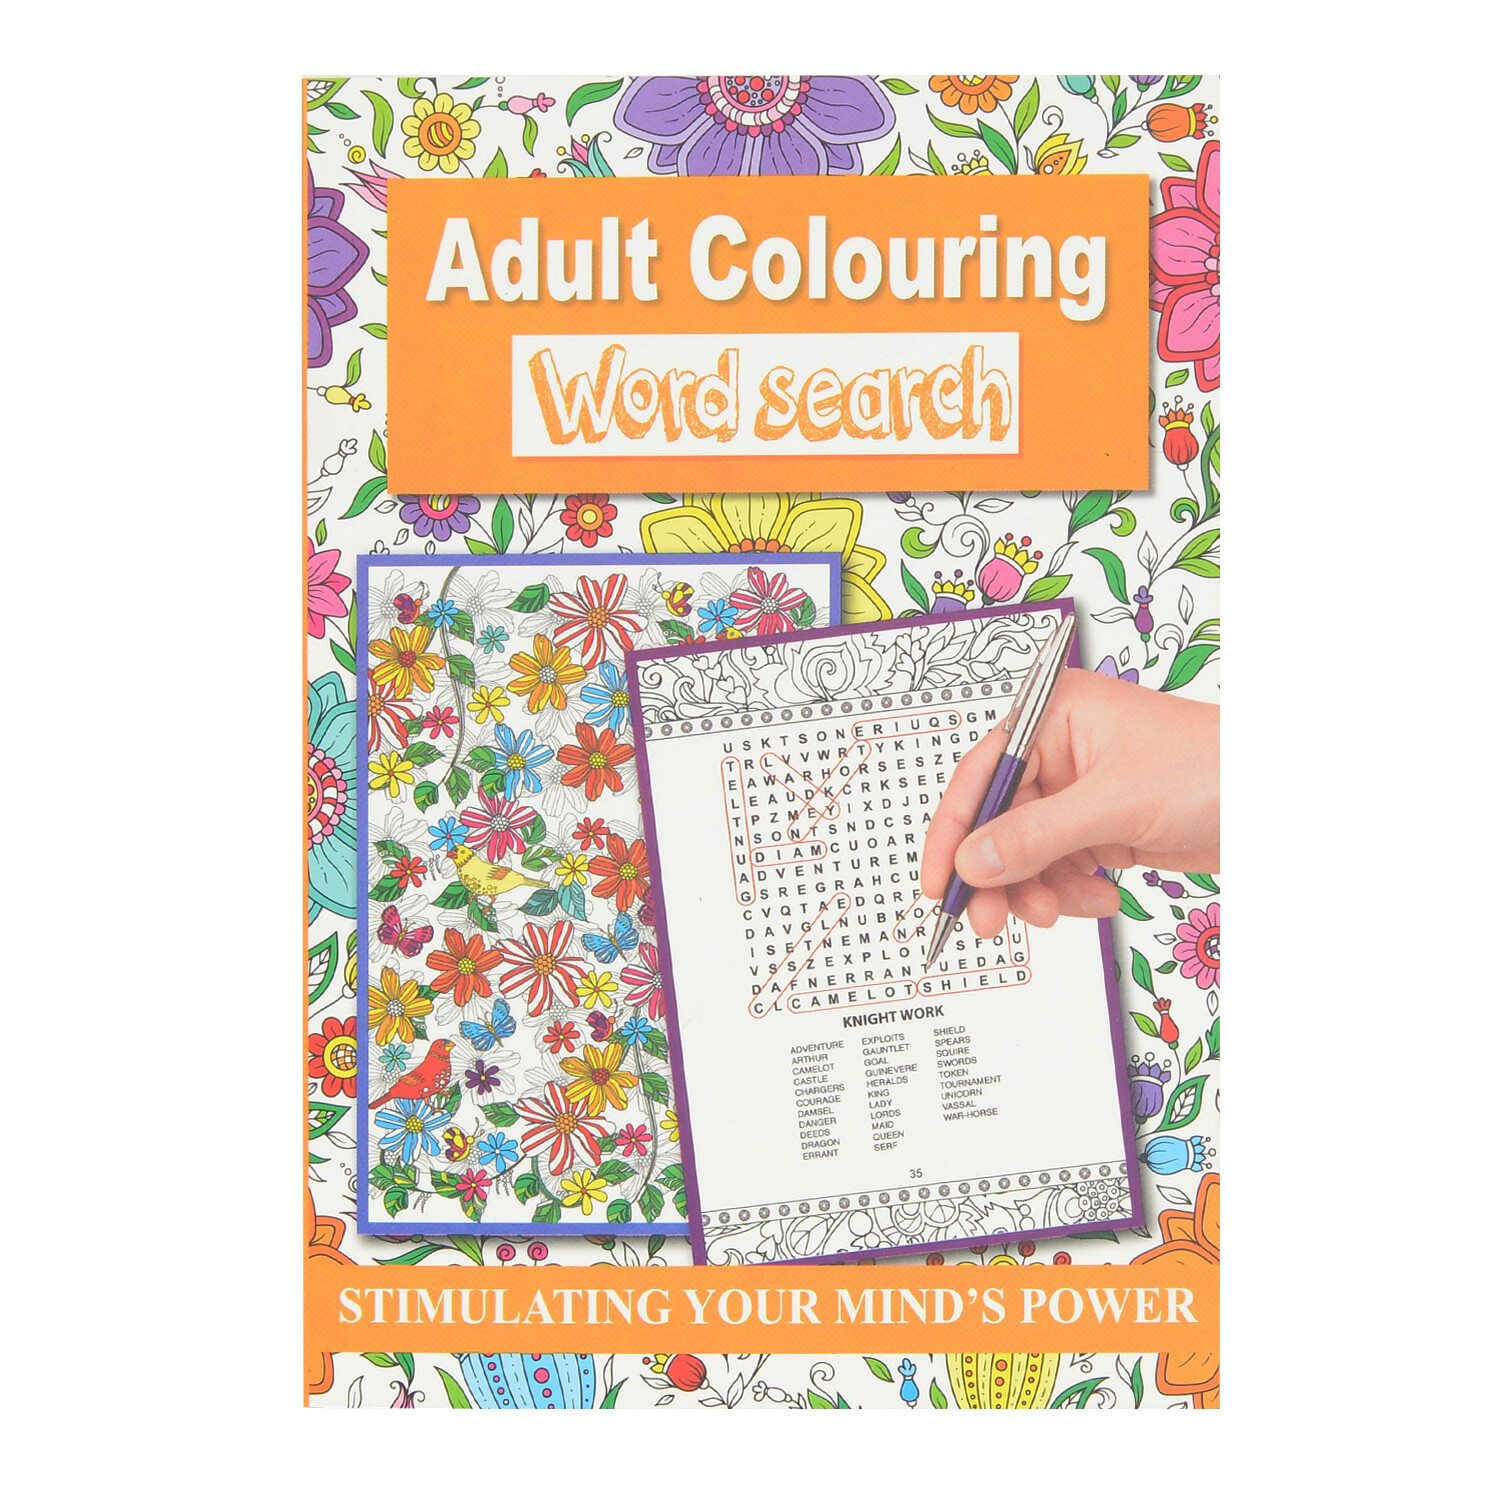 Adult Colouring and Word Search Image 4